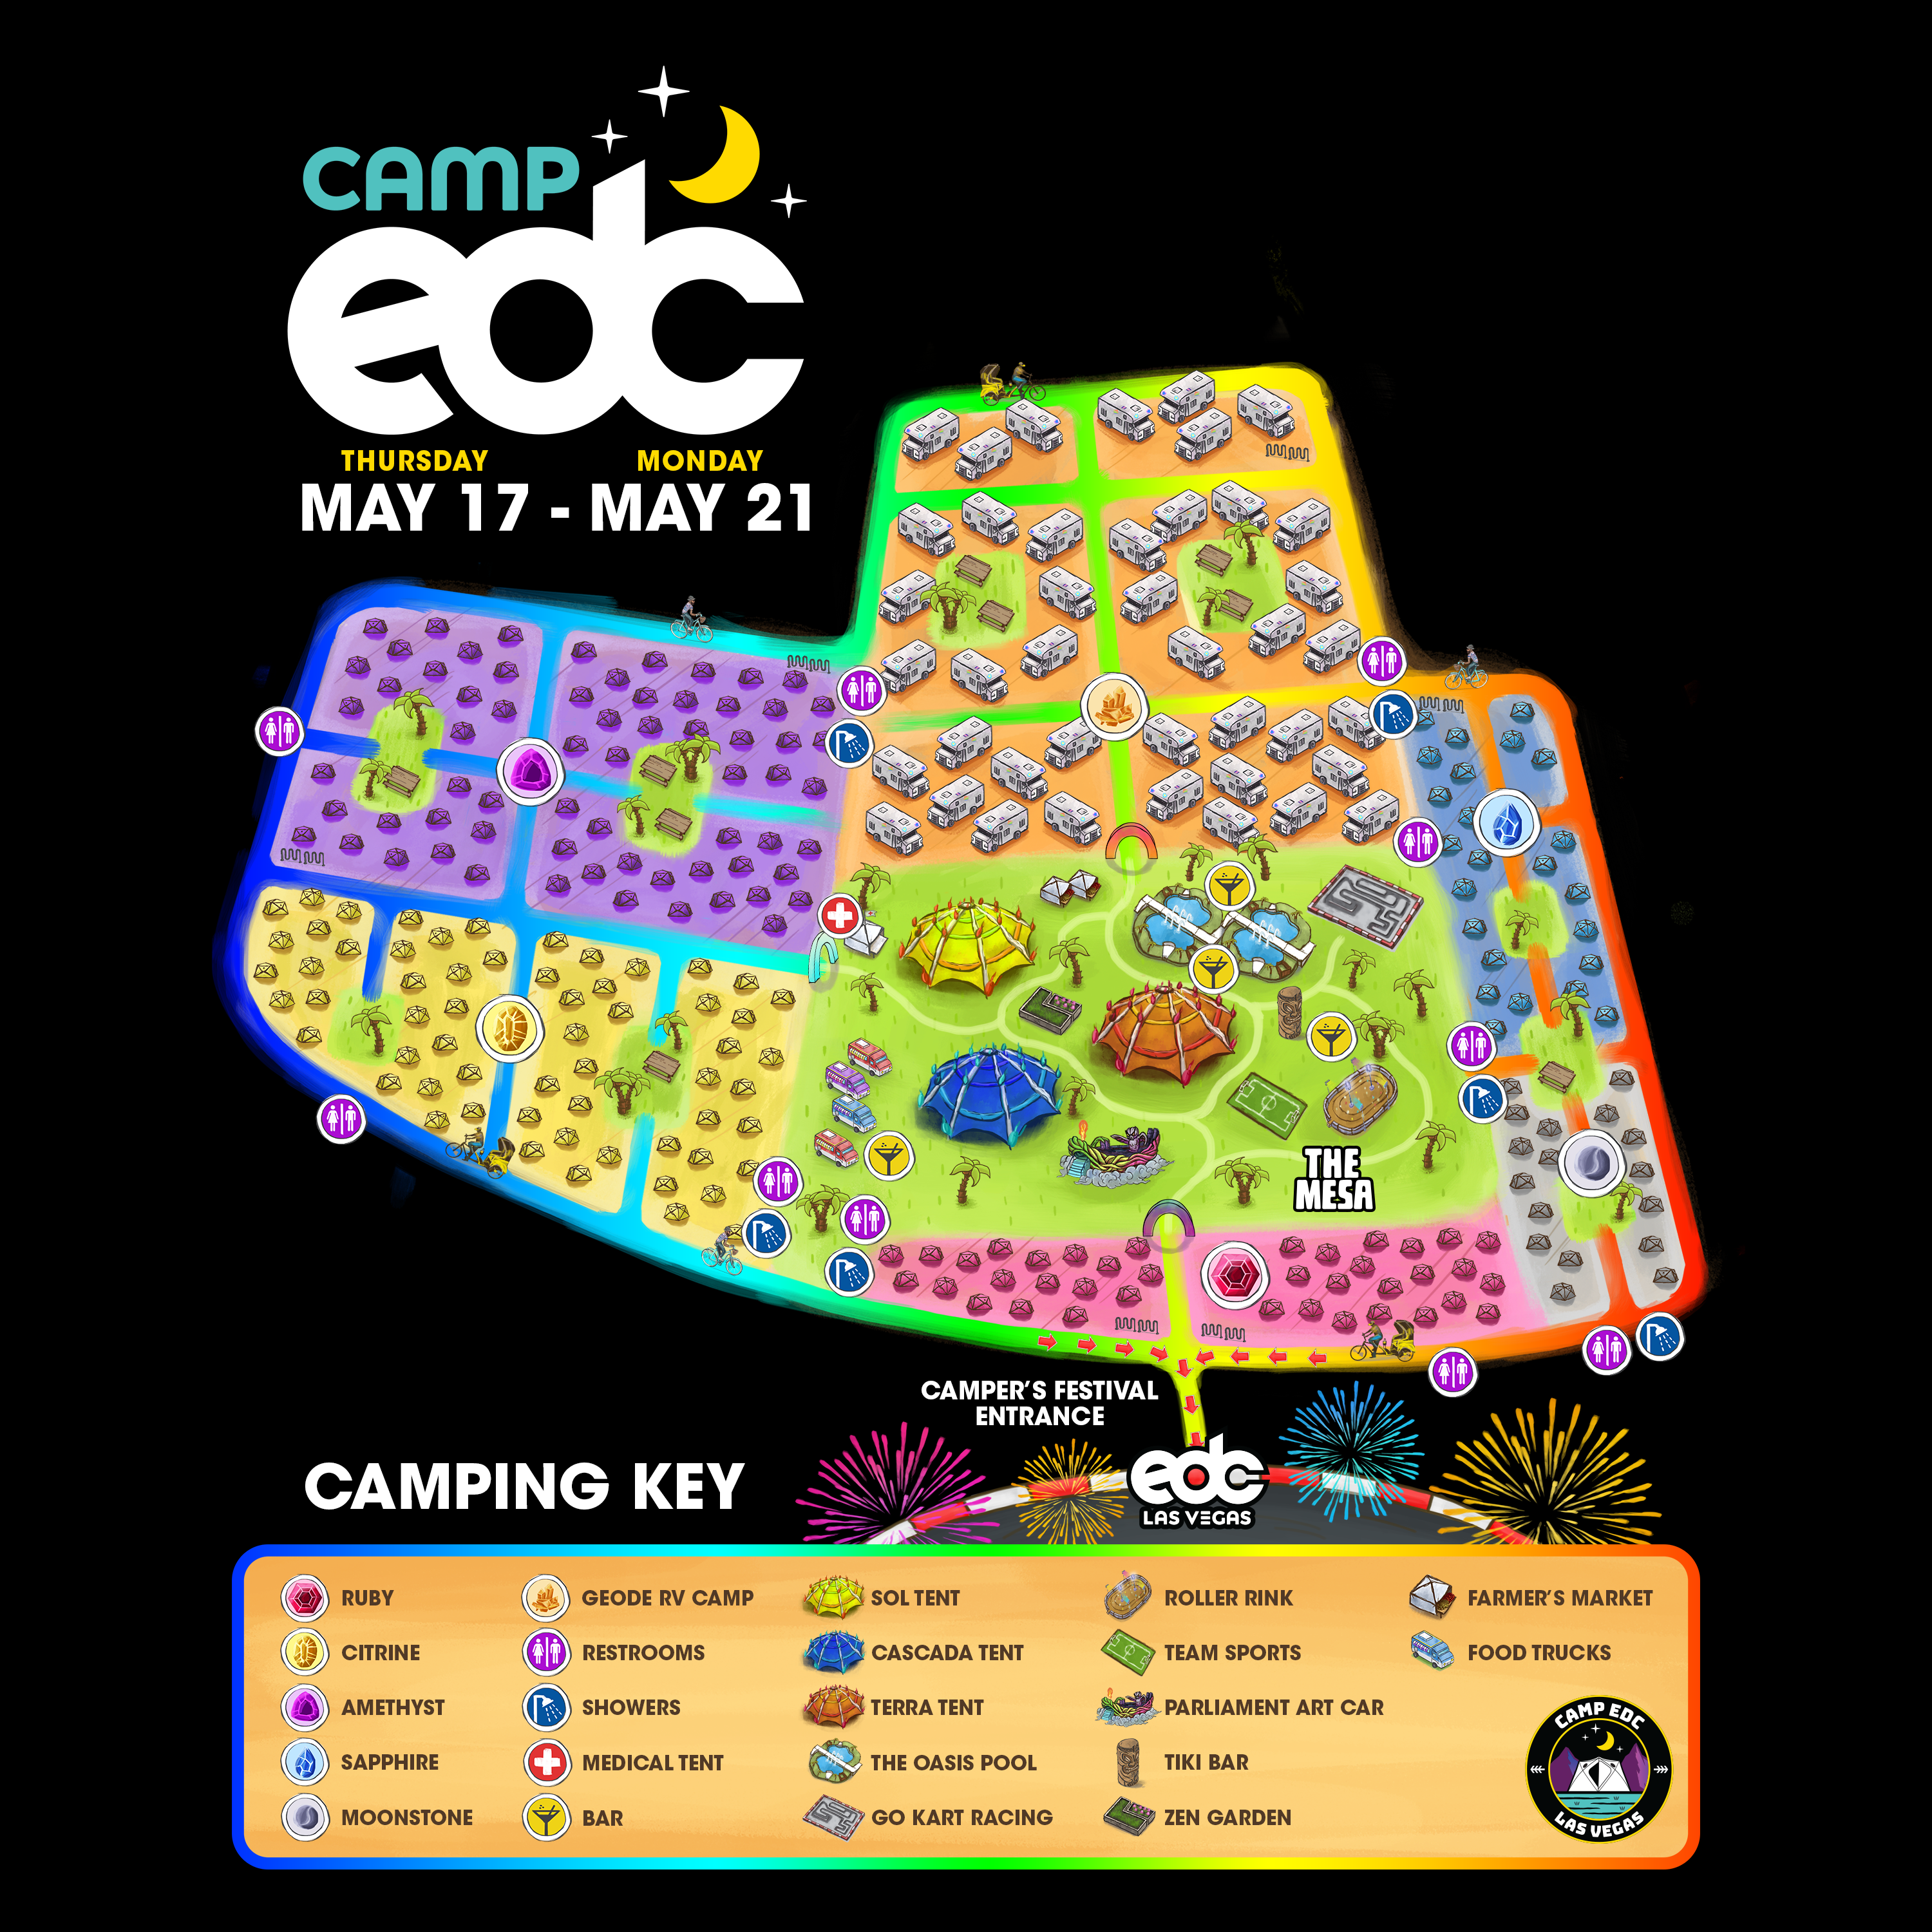 New Map Reveals Layouts and Attractions for Camp EDC | Insomniac